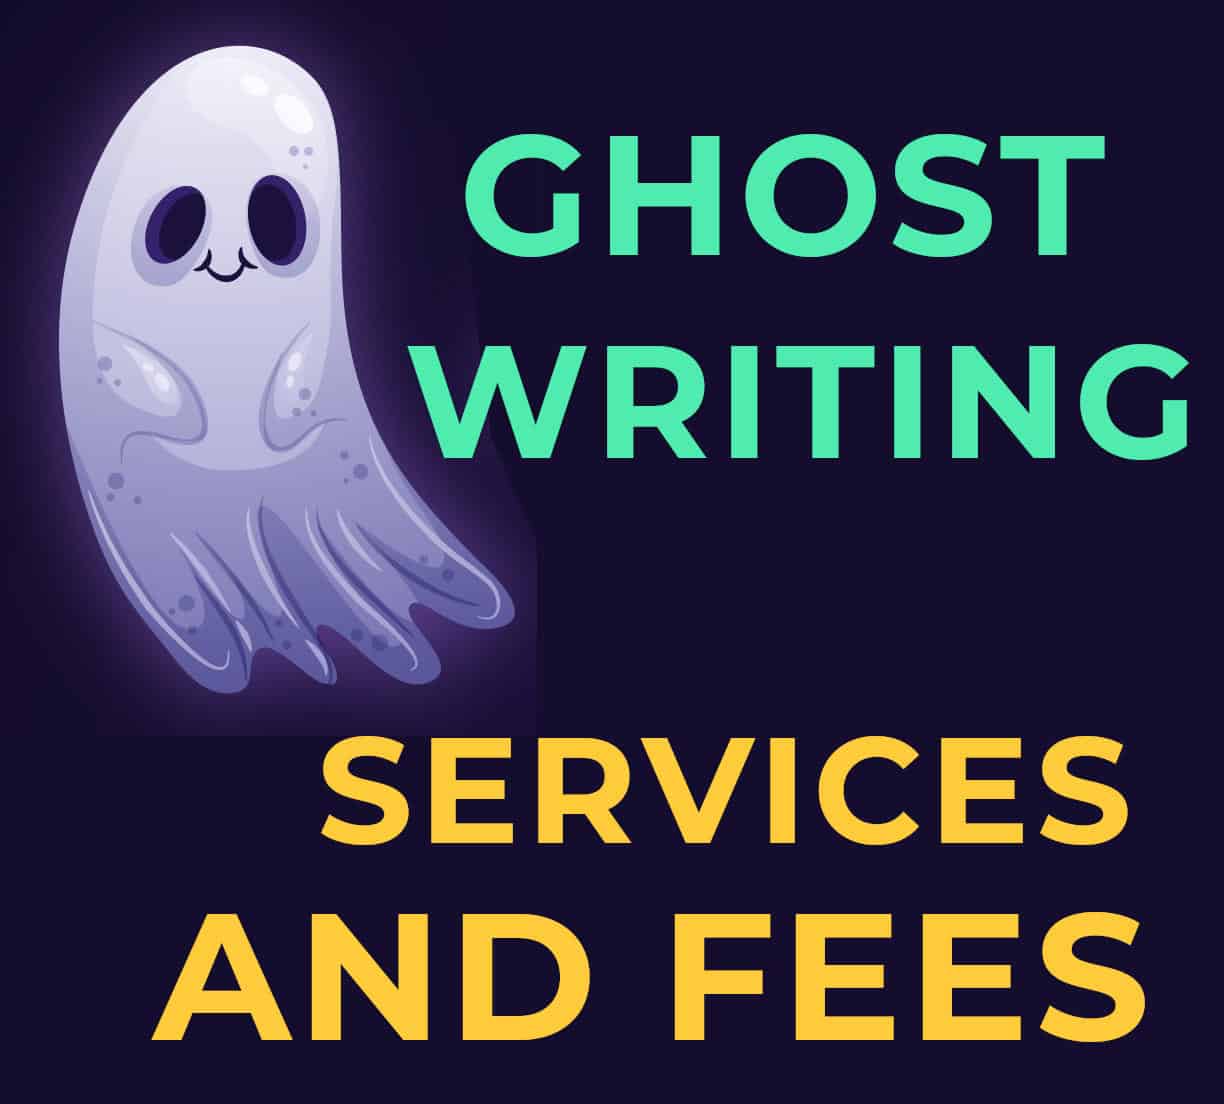 Ghostwriting Services and Fees Blog Header